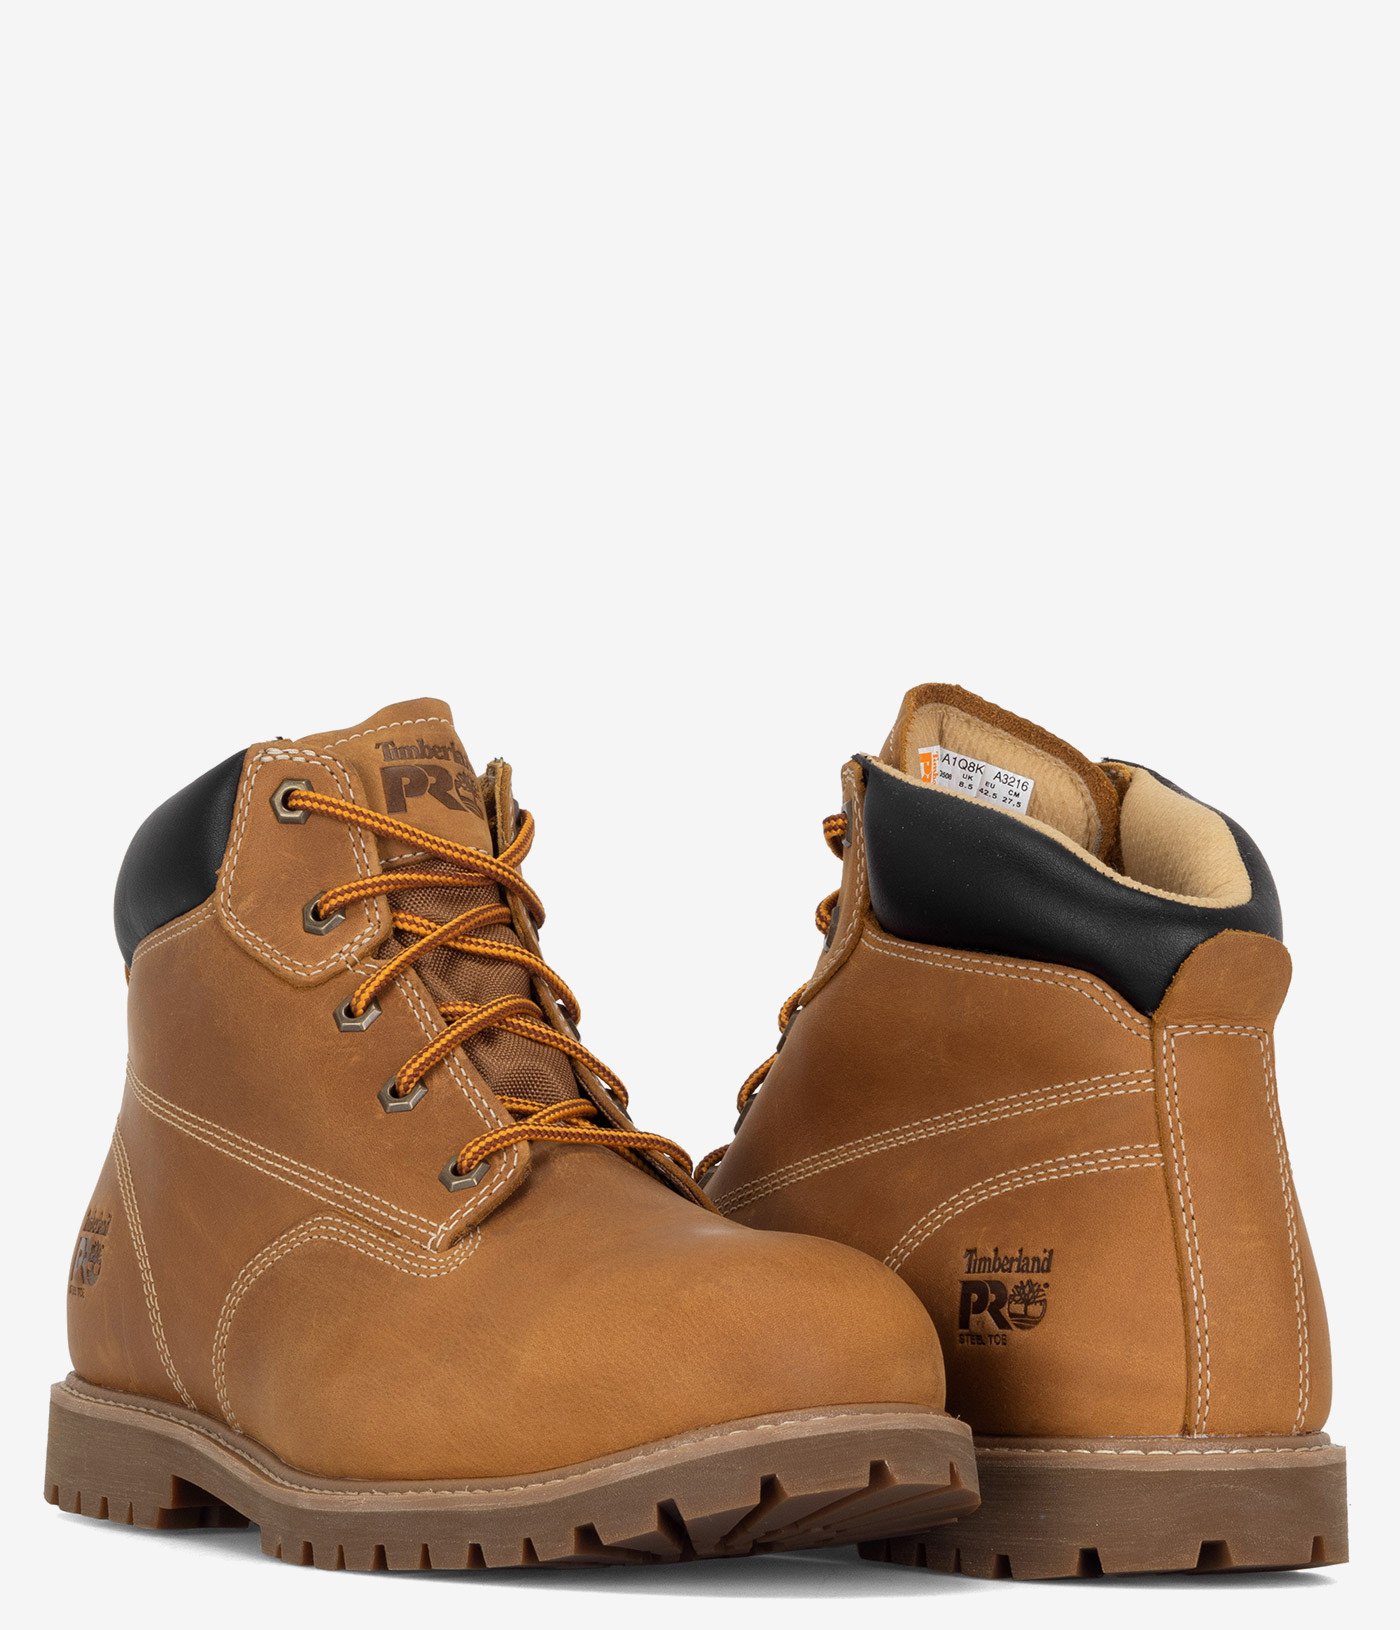 Timberland PRO Gritstone 6" Safety Toe EH Work Boot